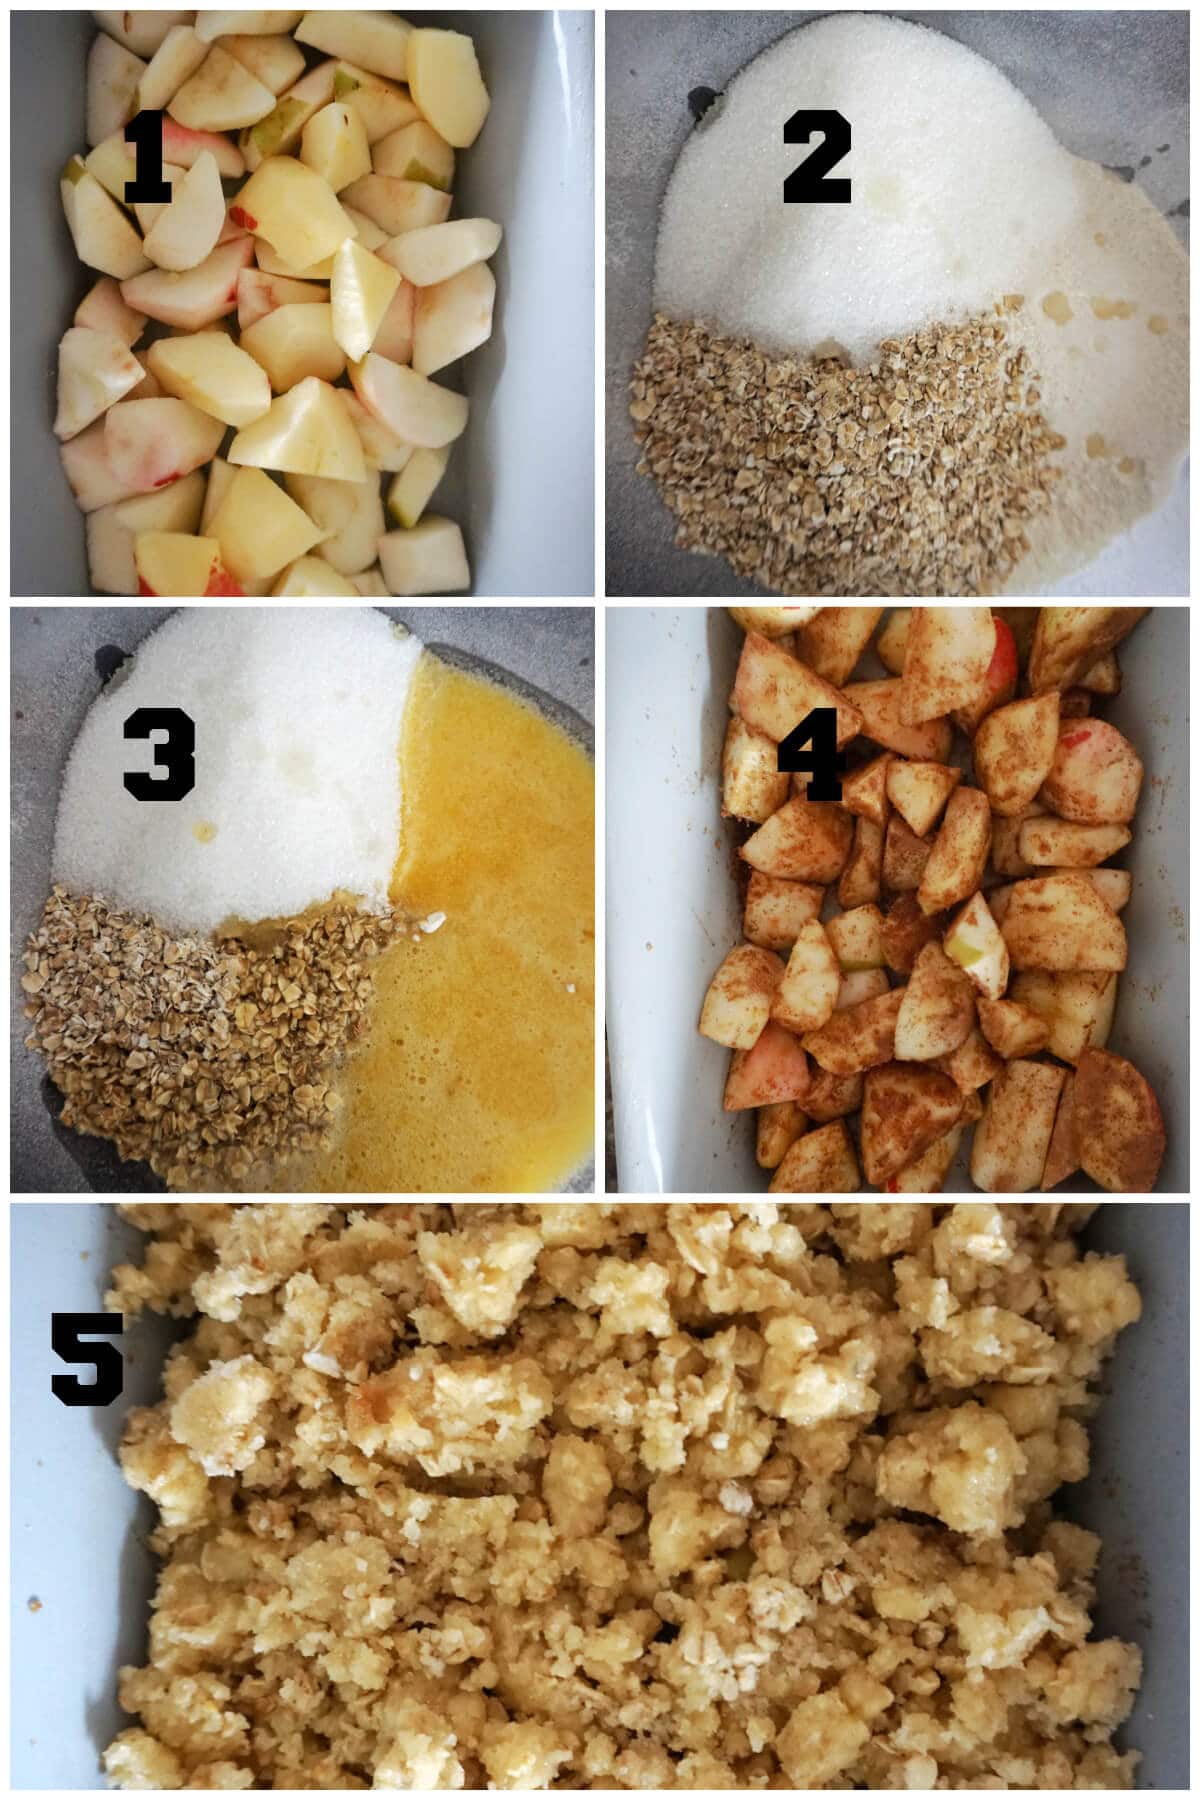 Collage of 5 pictures to show how to make apple crumble